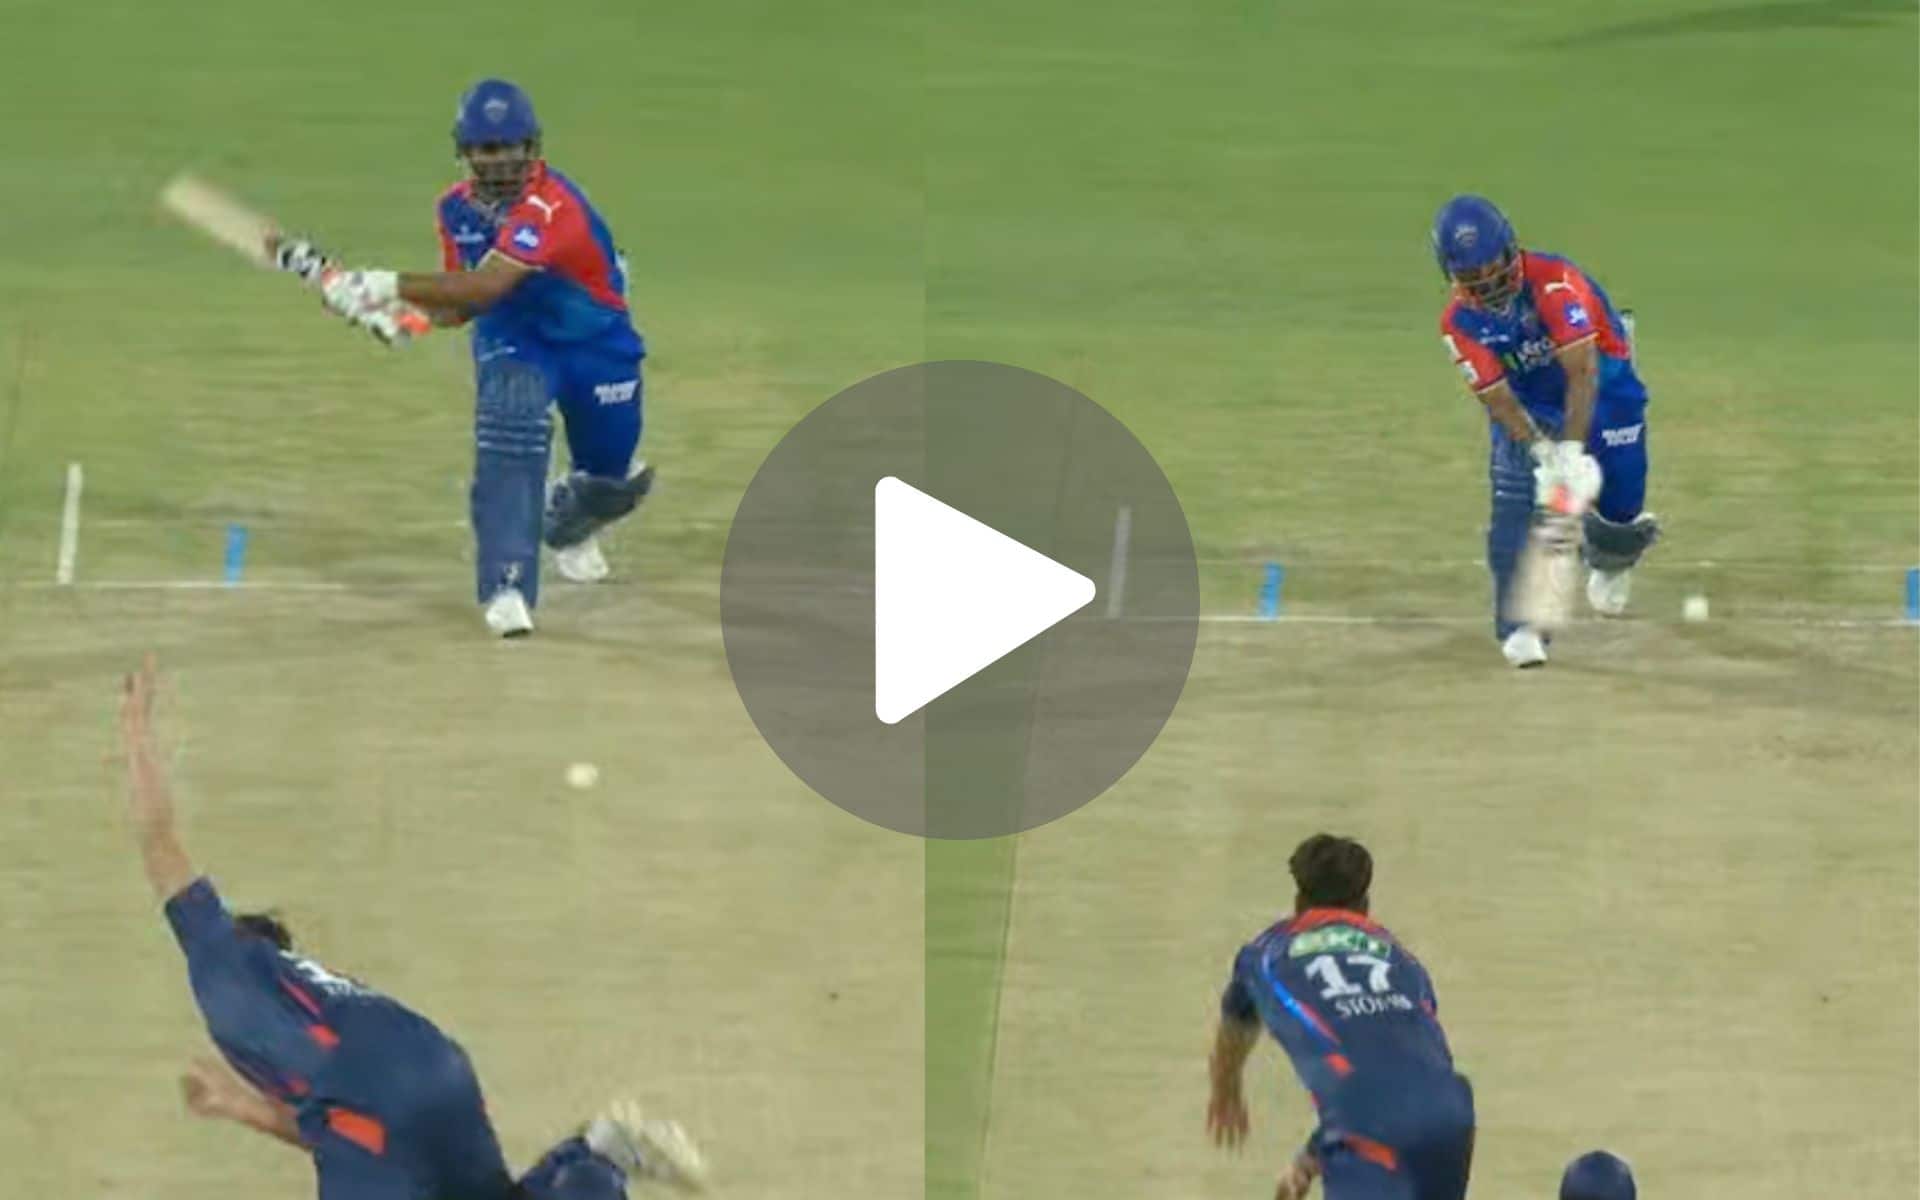 [Watch] Rishabh Pant Brings Out Outrageous 'Reverse-Scoop' Against Marcus Stoinis 